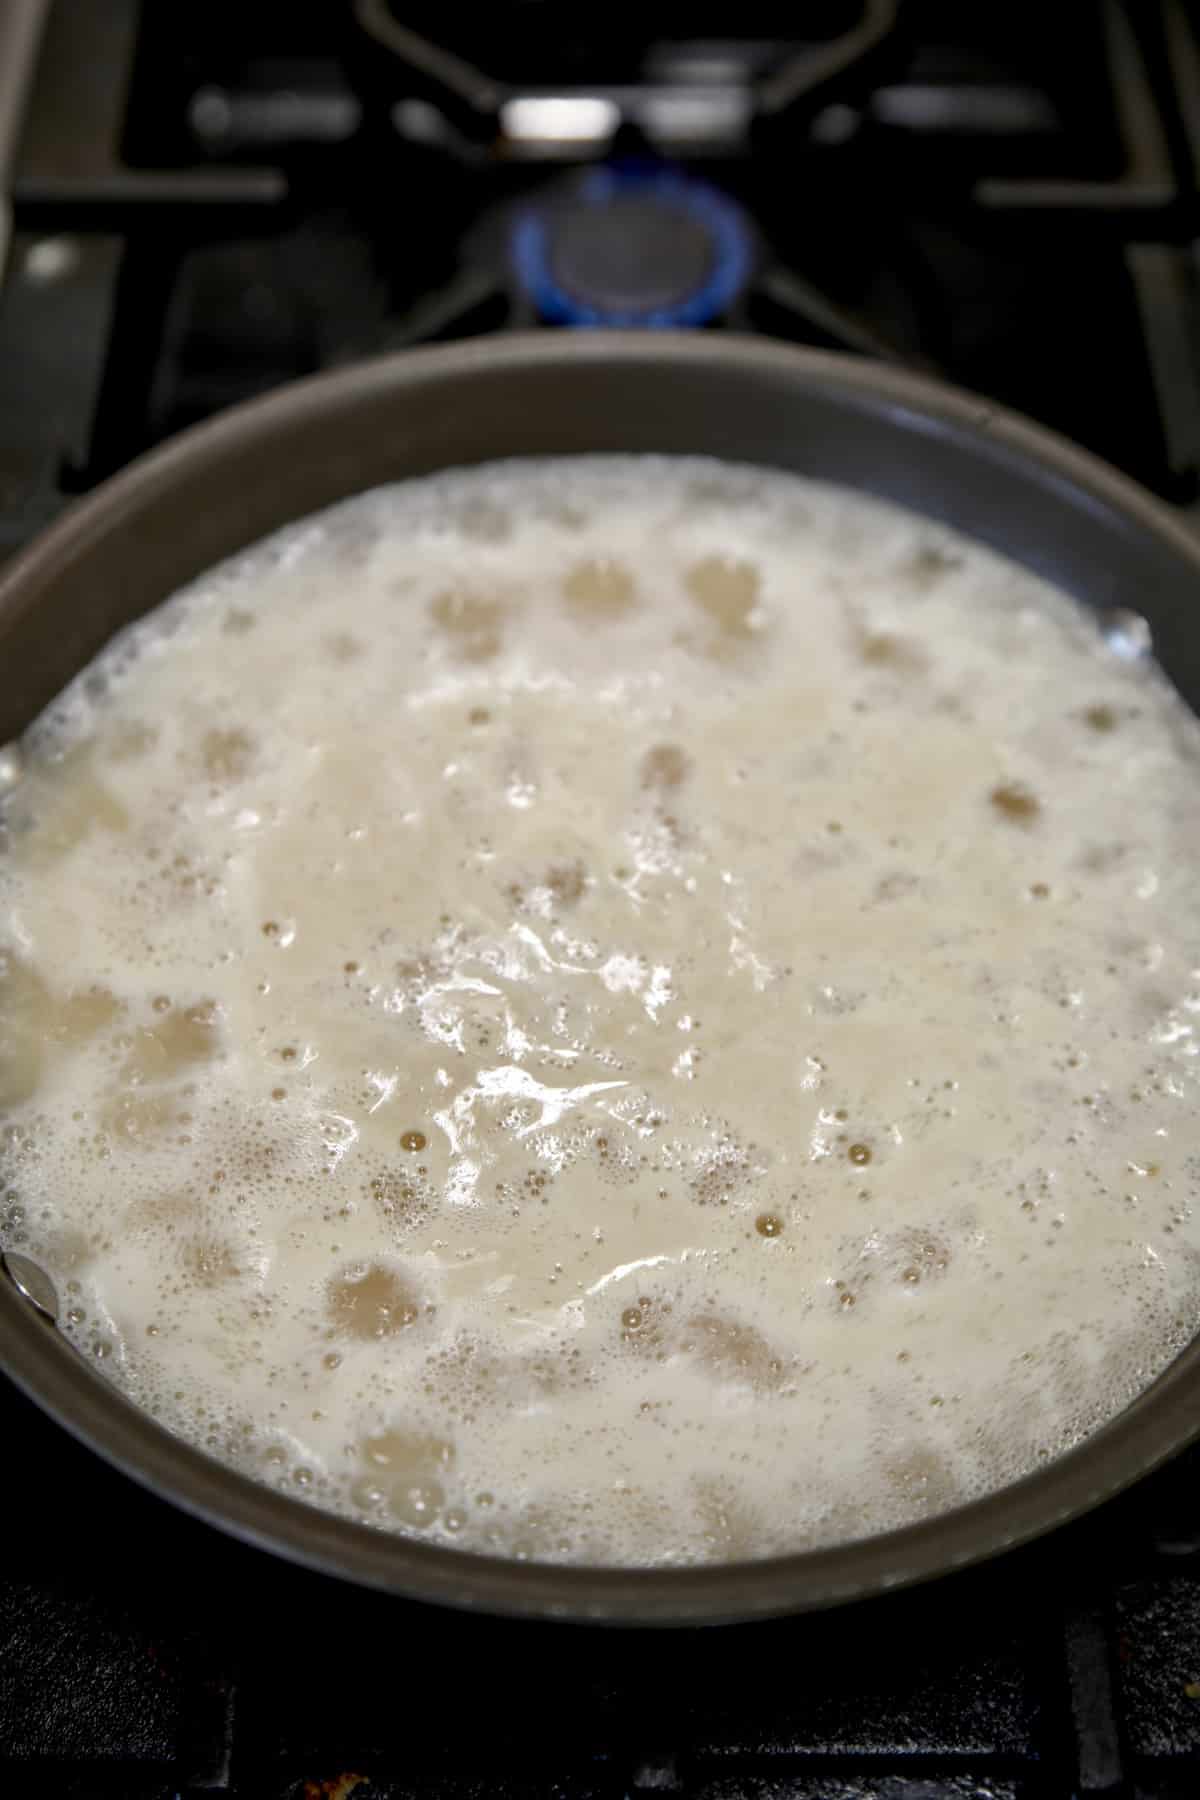 Boiling rice in a pan.